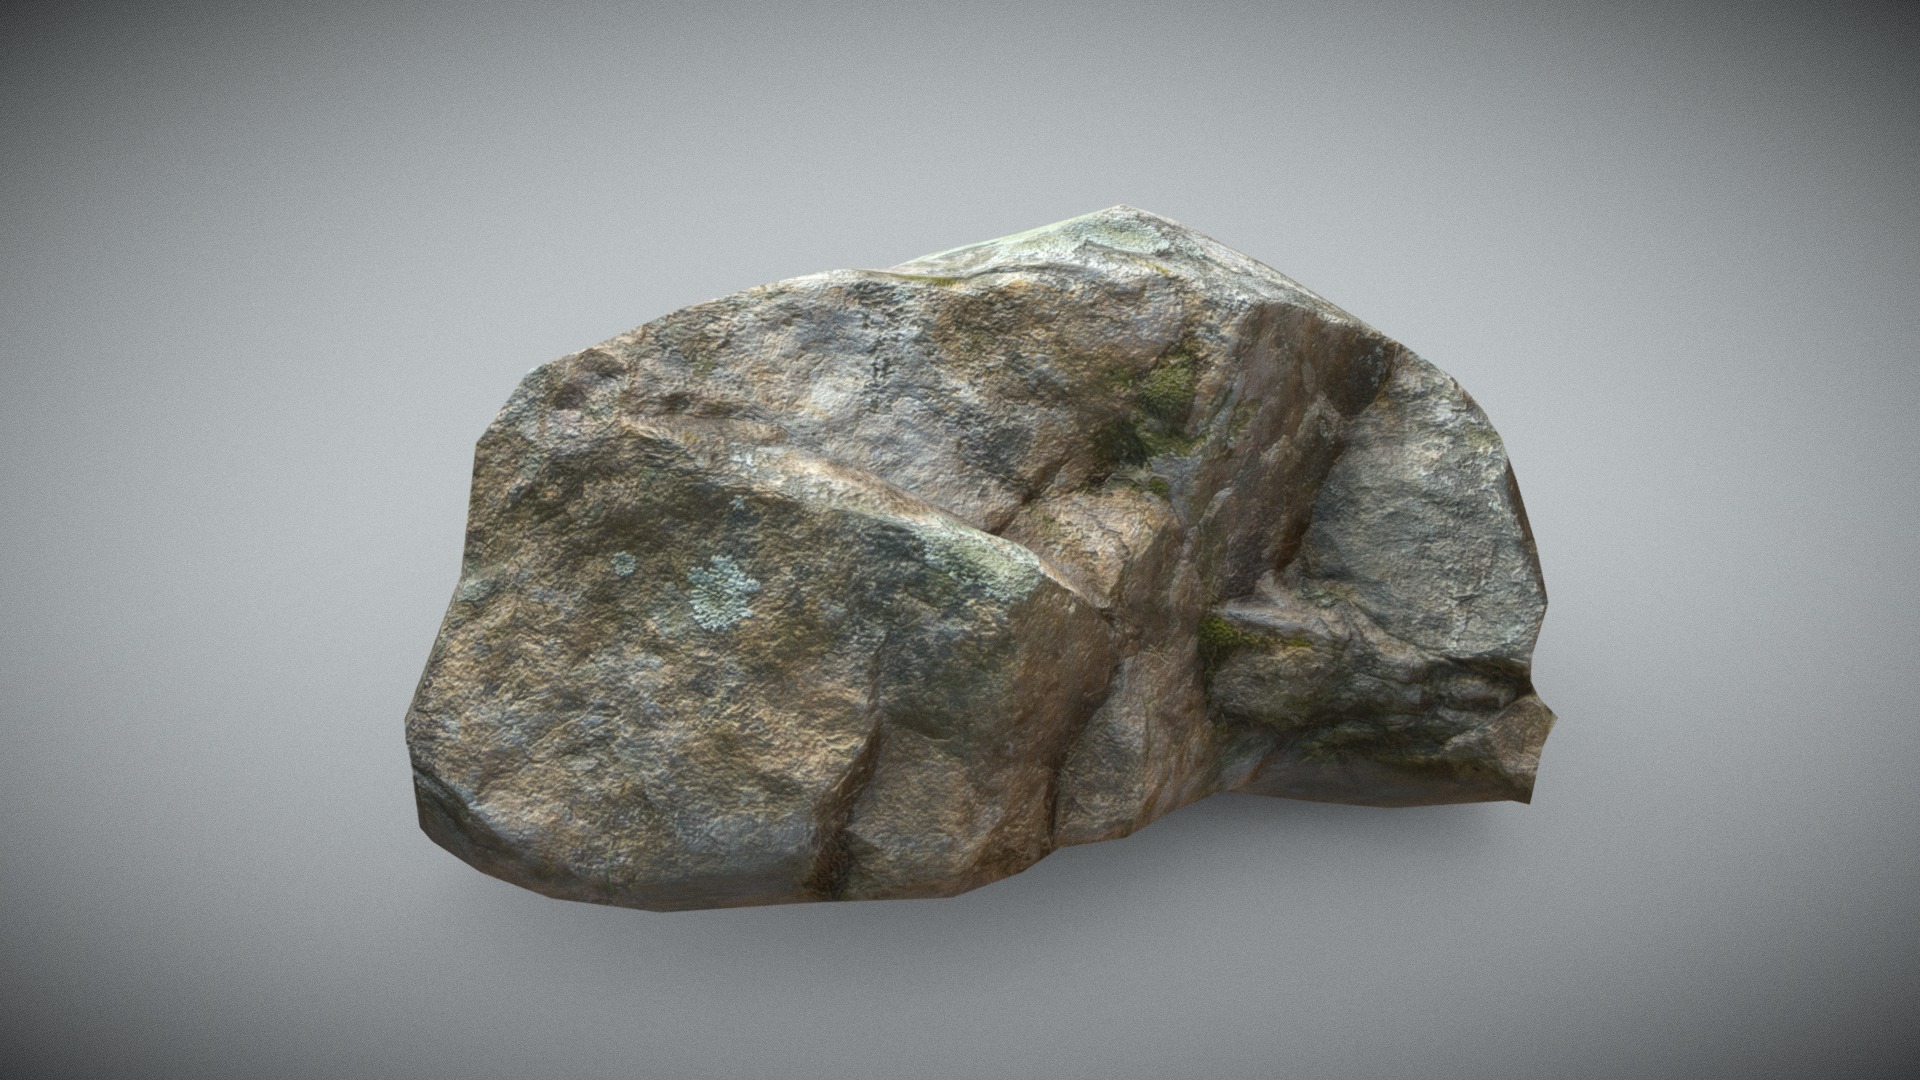 3D model ROCK 002 - This is a 3D model of the ROCK 002. The 3D model is about a rock with a rough surface.